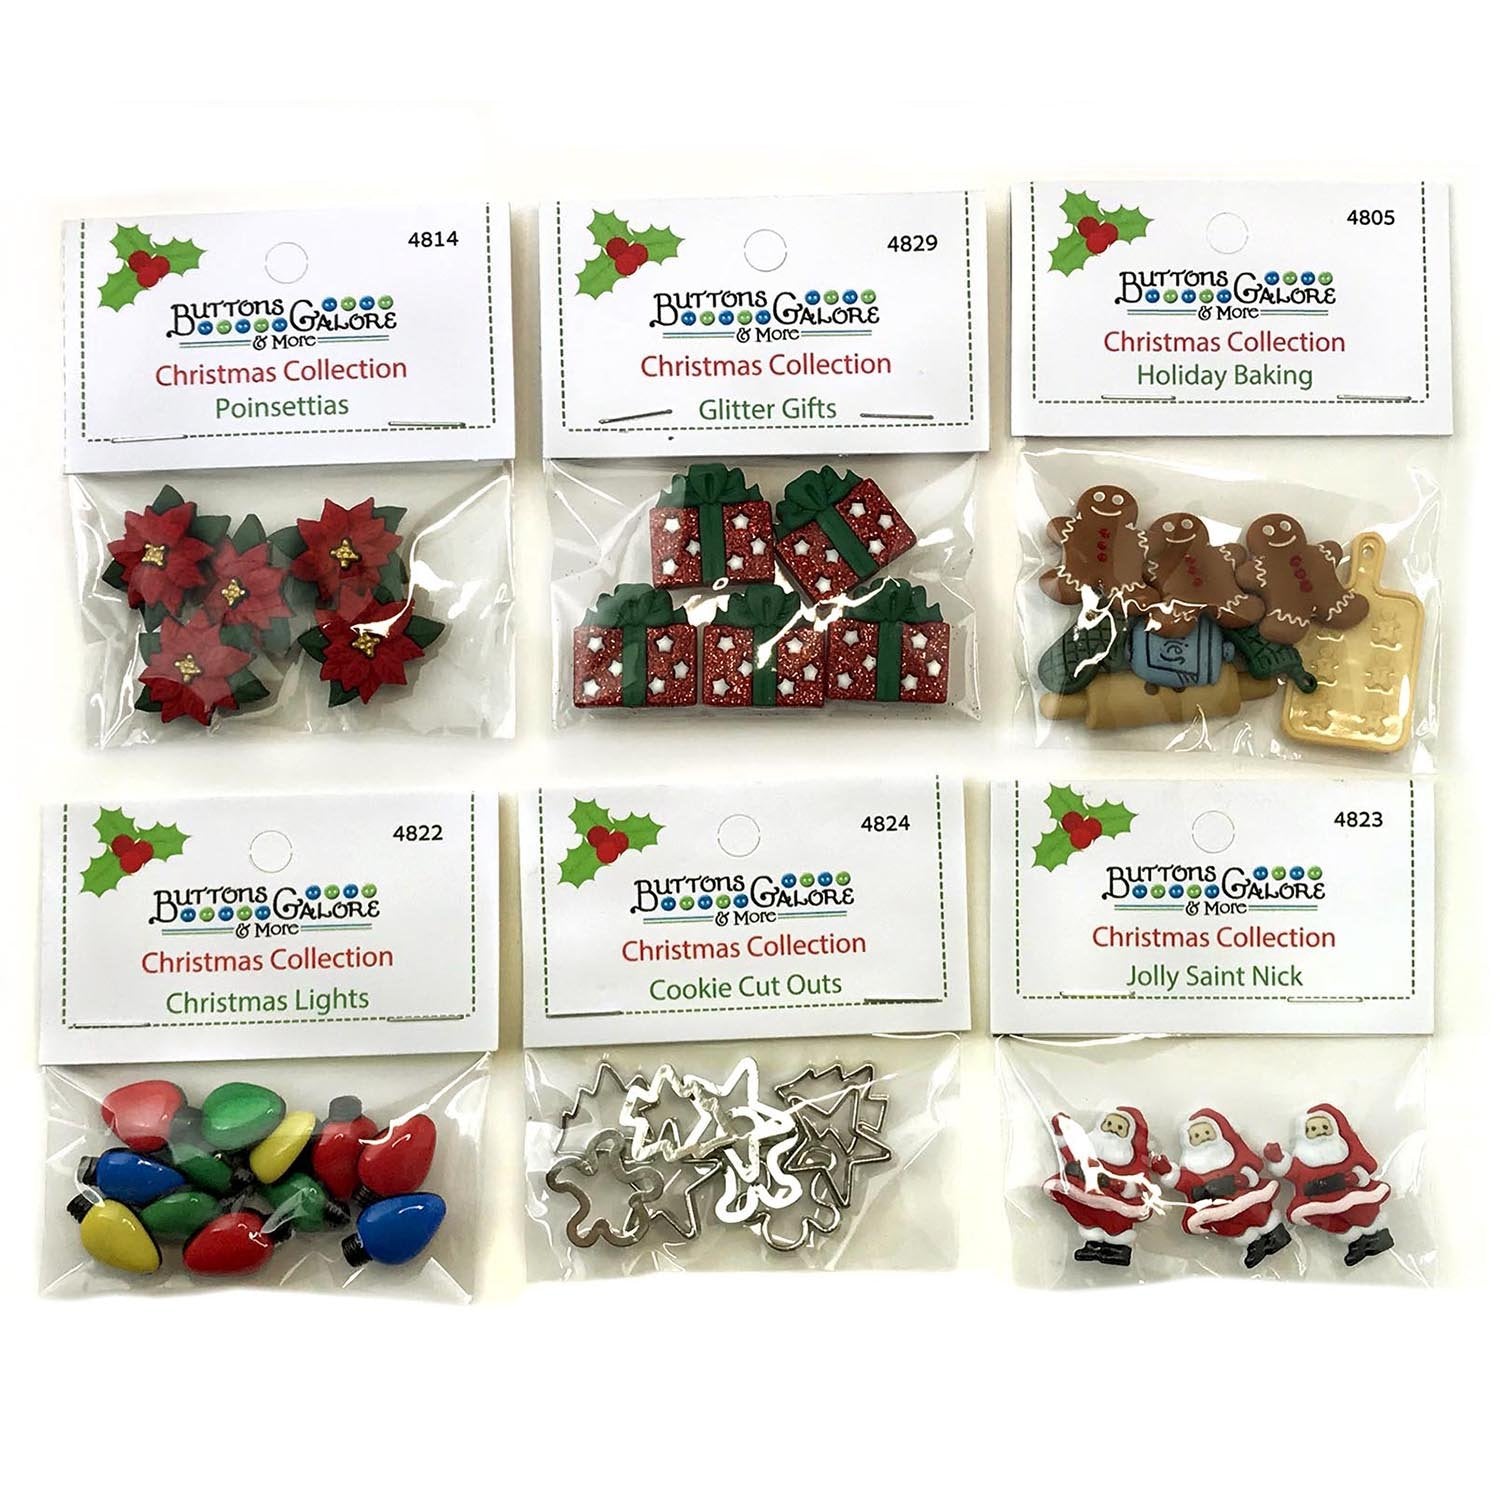 Christmas Bundle 5 - Buttons Galore and More